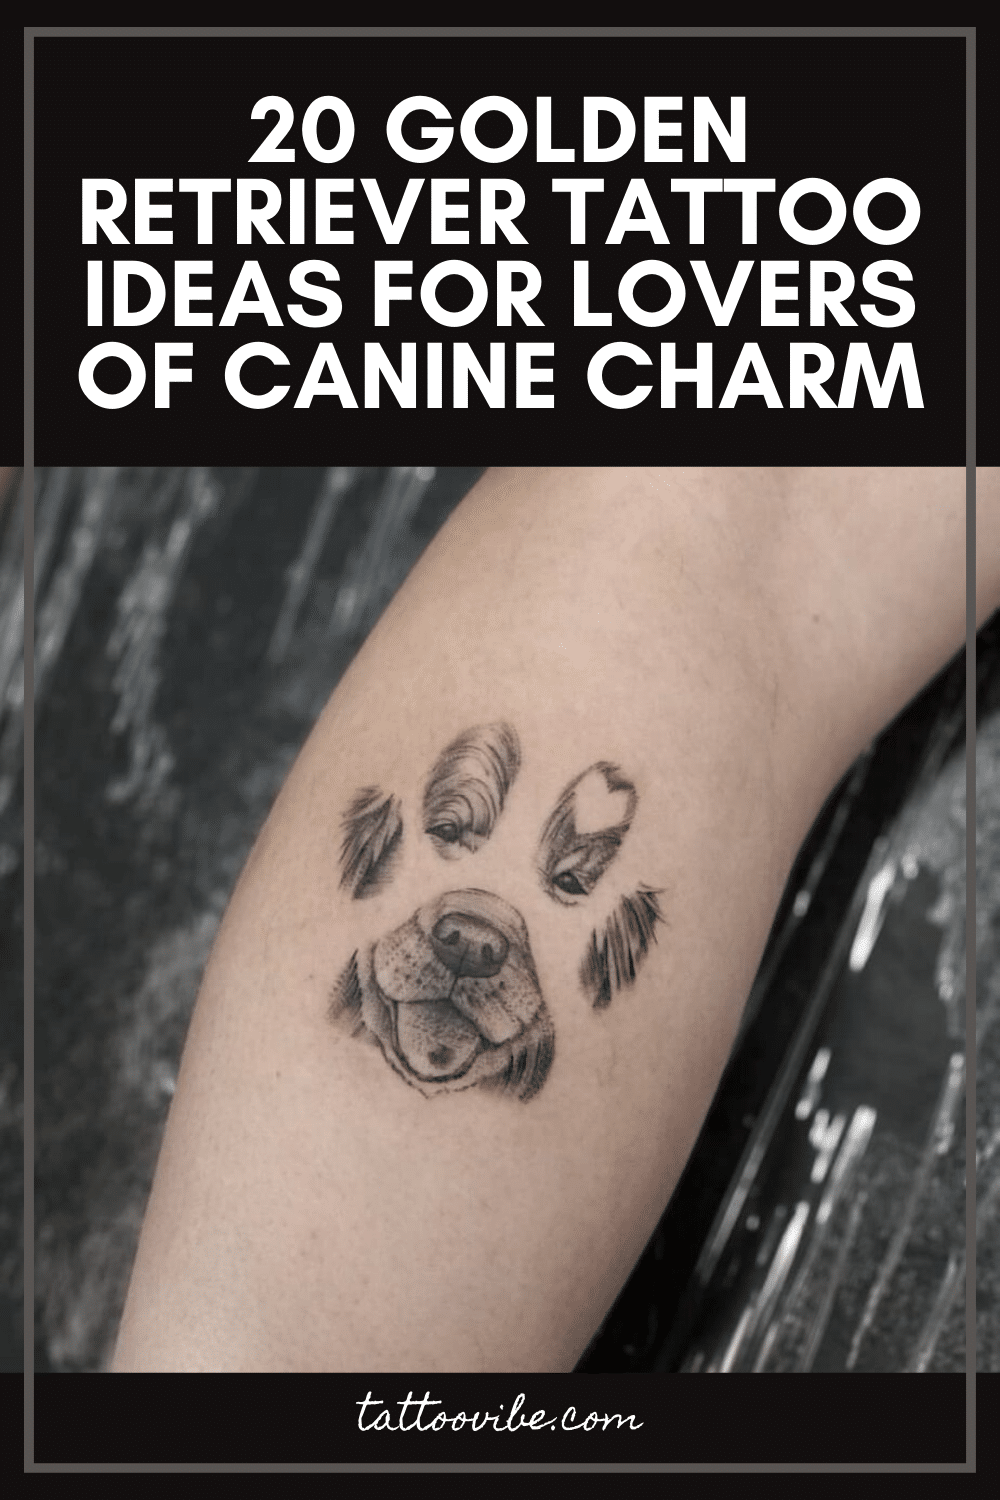 20 Golden Retriever Tattoo Ideas For Lovers Of Canine Charm